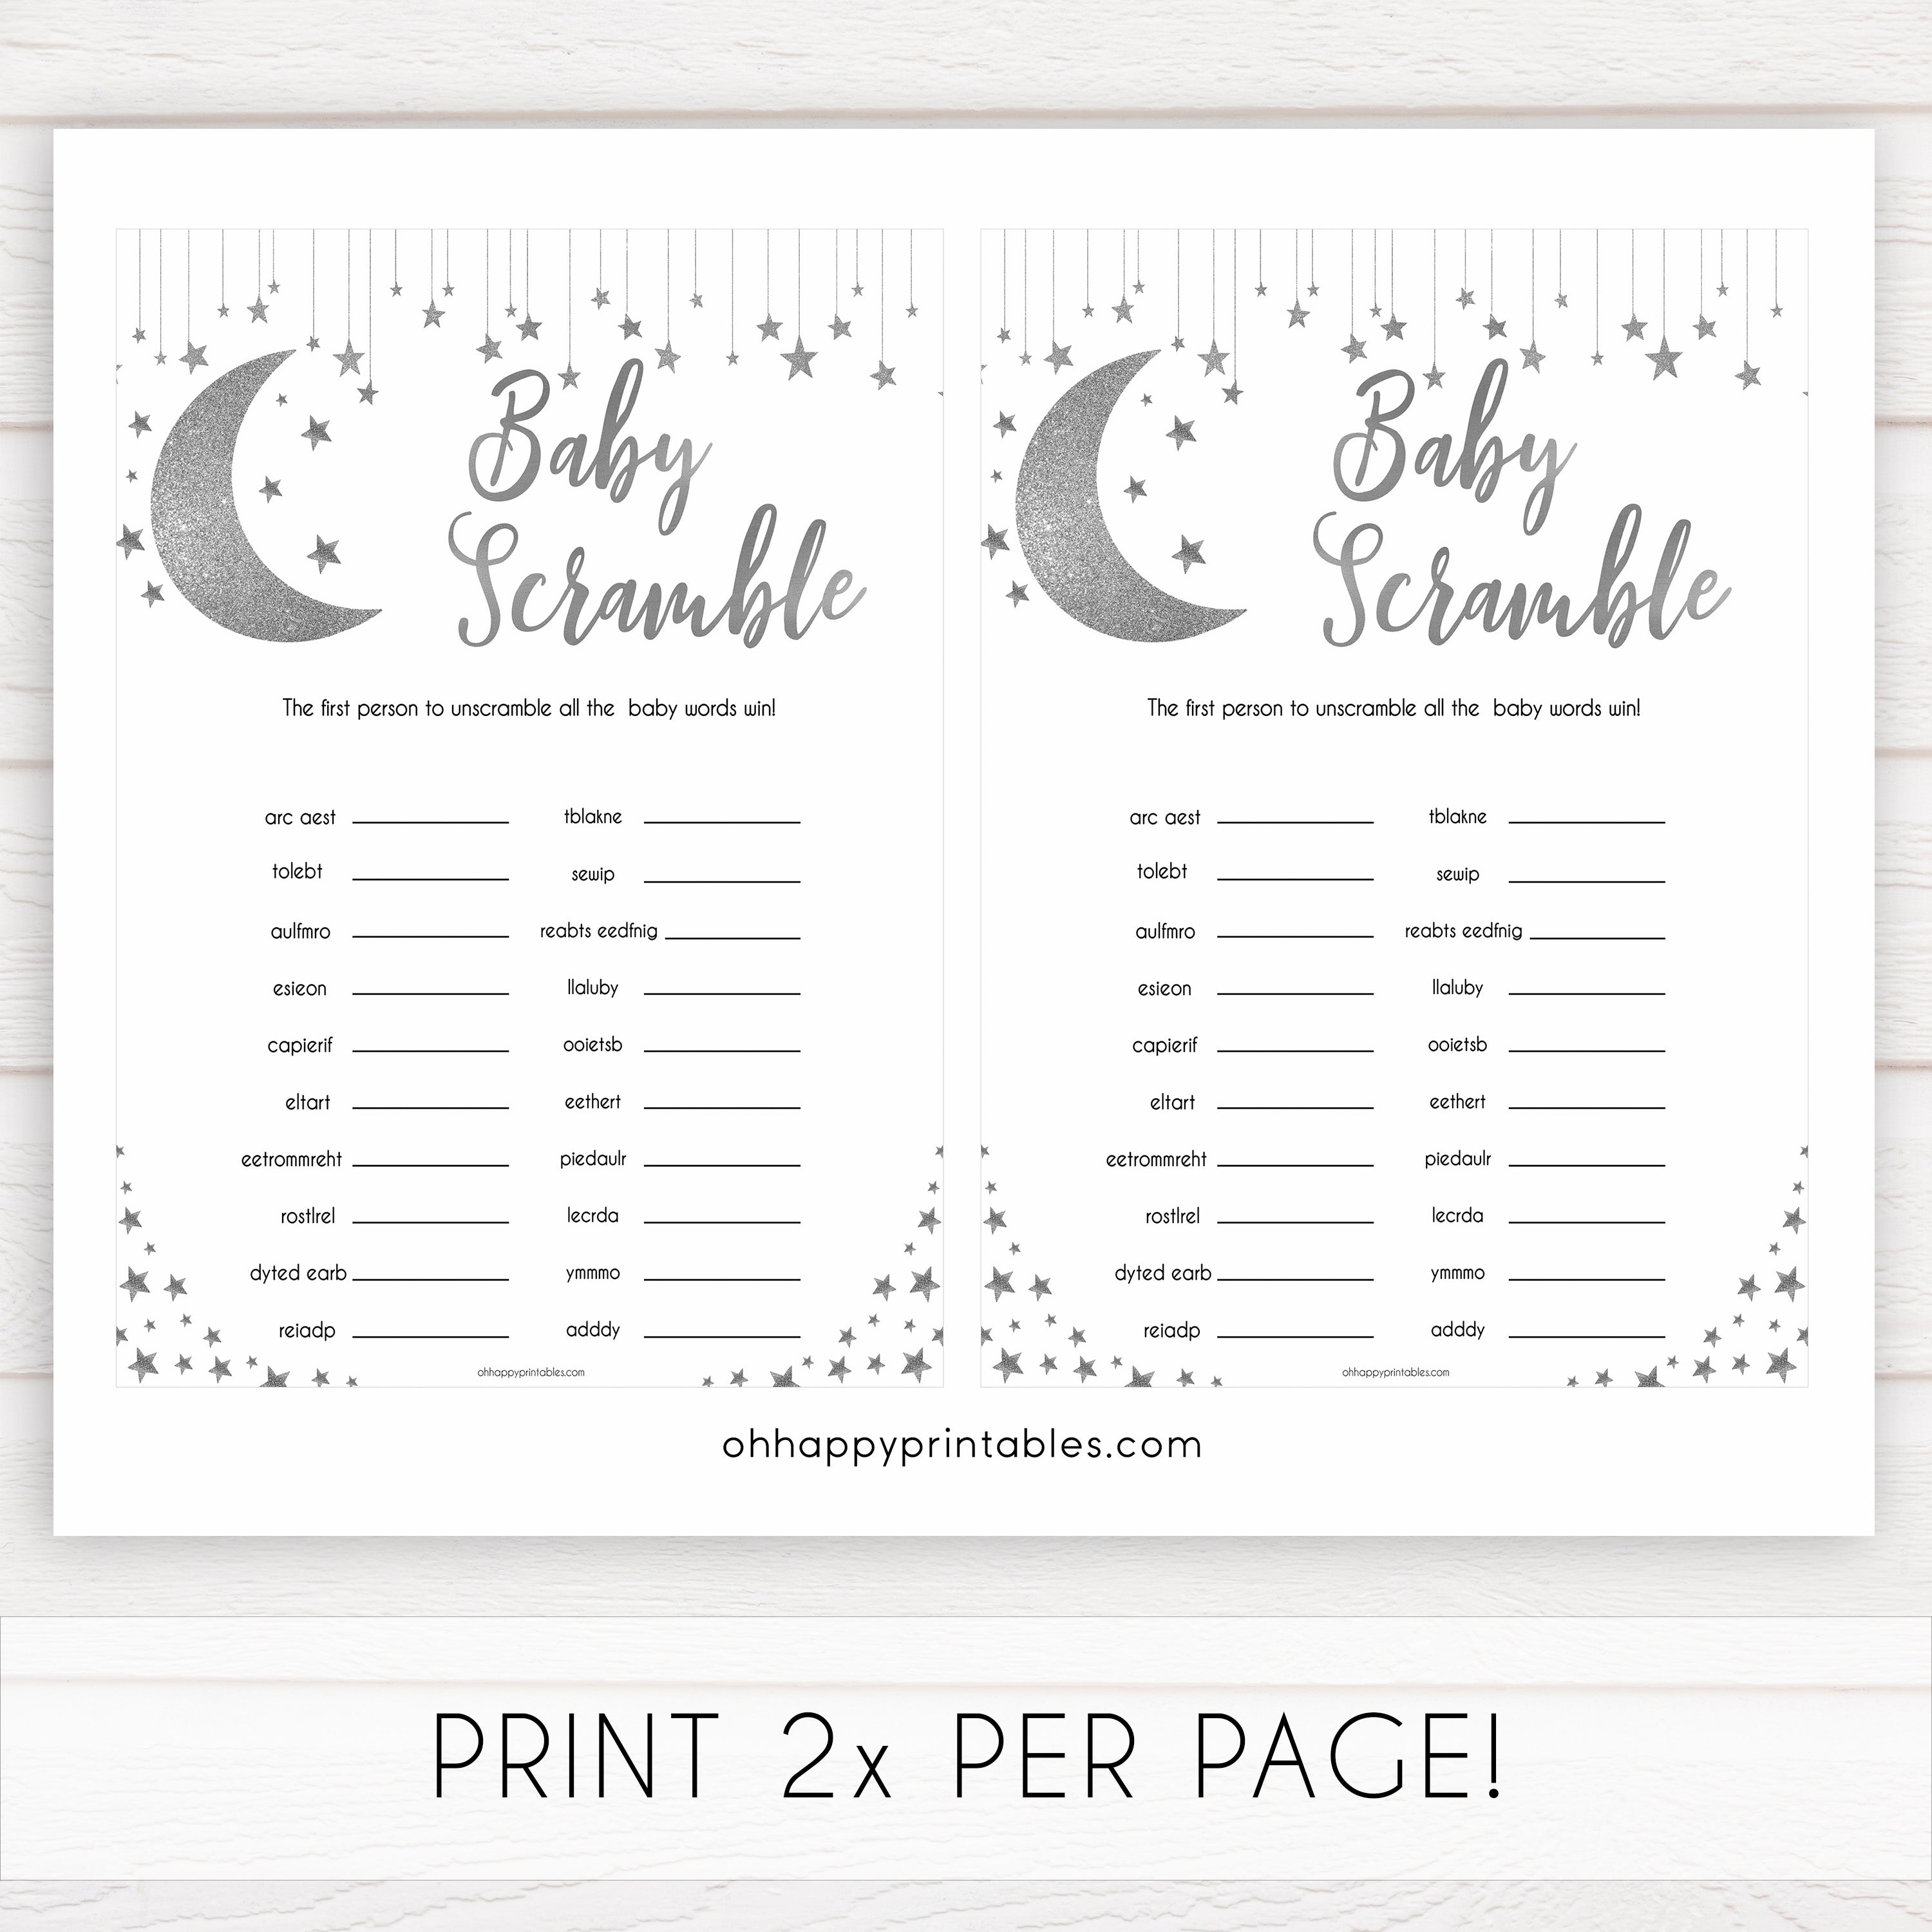 Silver little star, baby scramble baby games, baby shower games, printable baby games, fun baby games, twinkle little star games, baby games, fun baby shower ideas, baby shower ideas